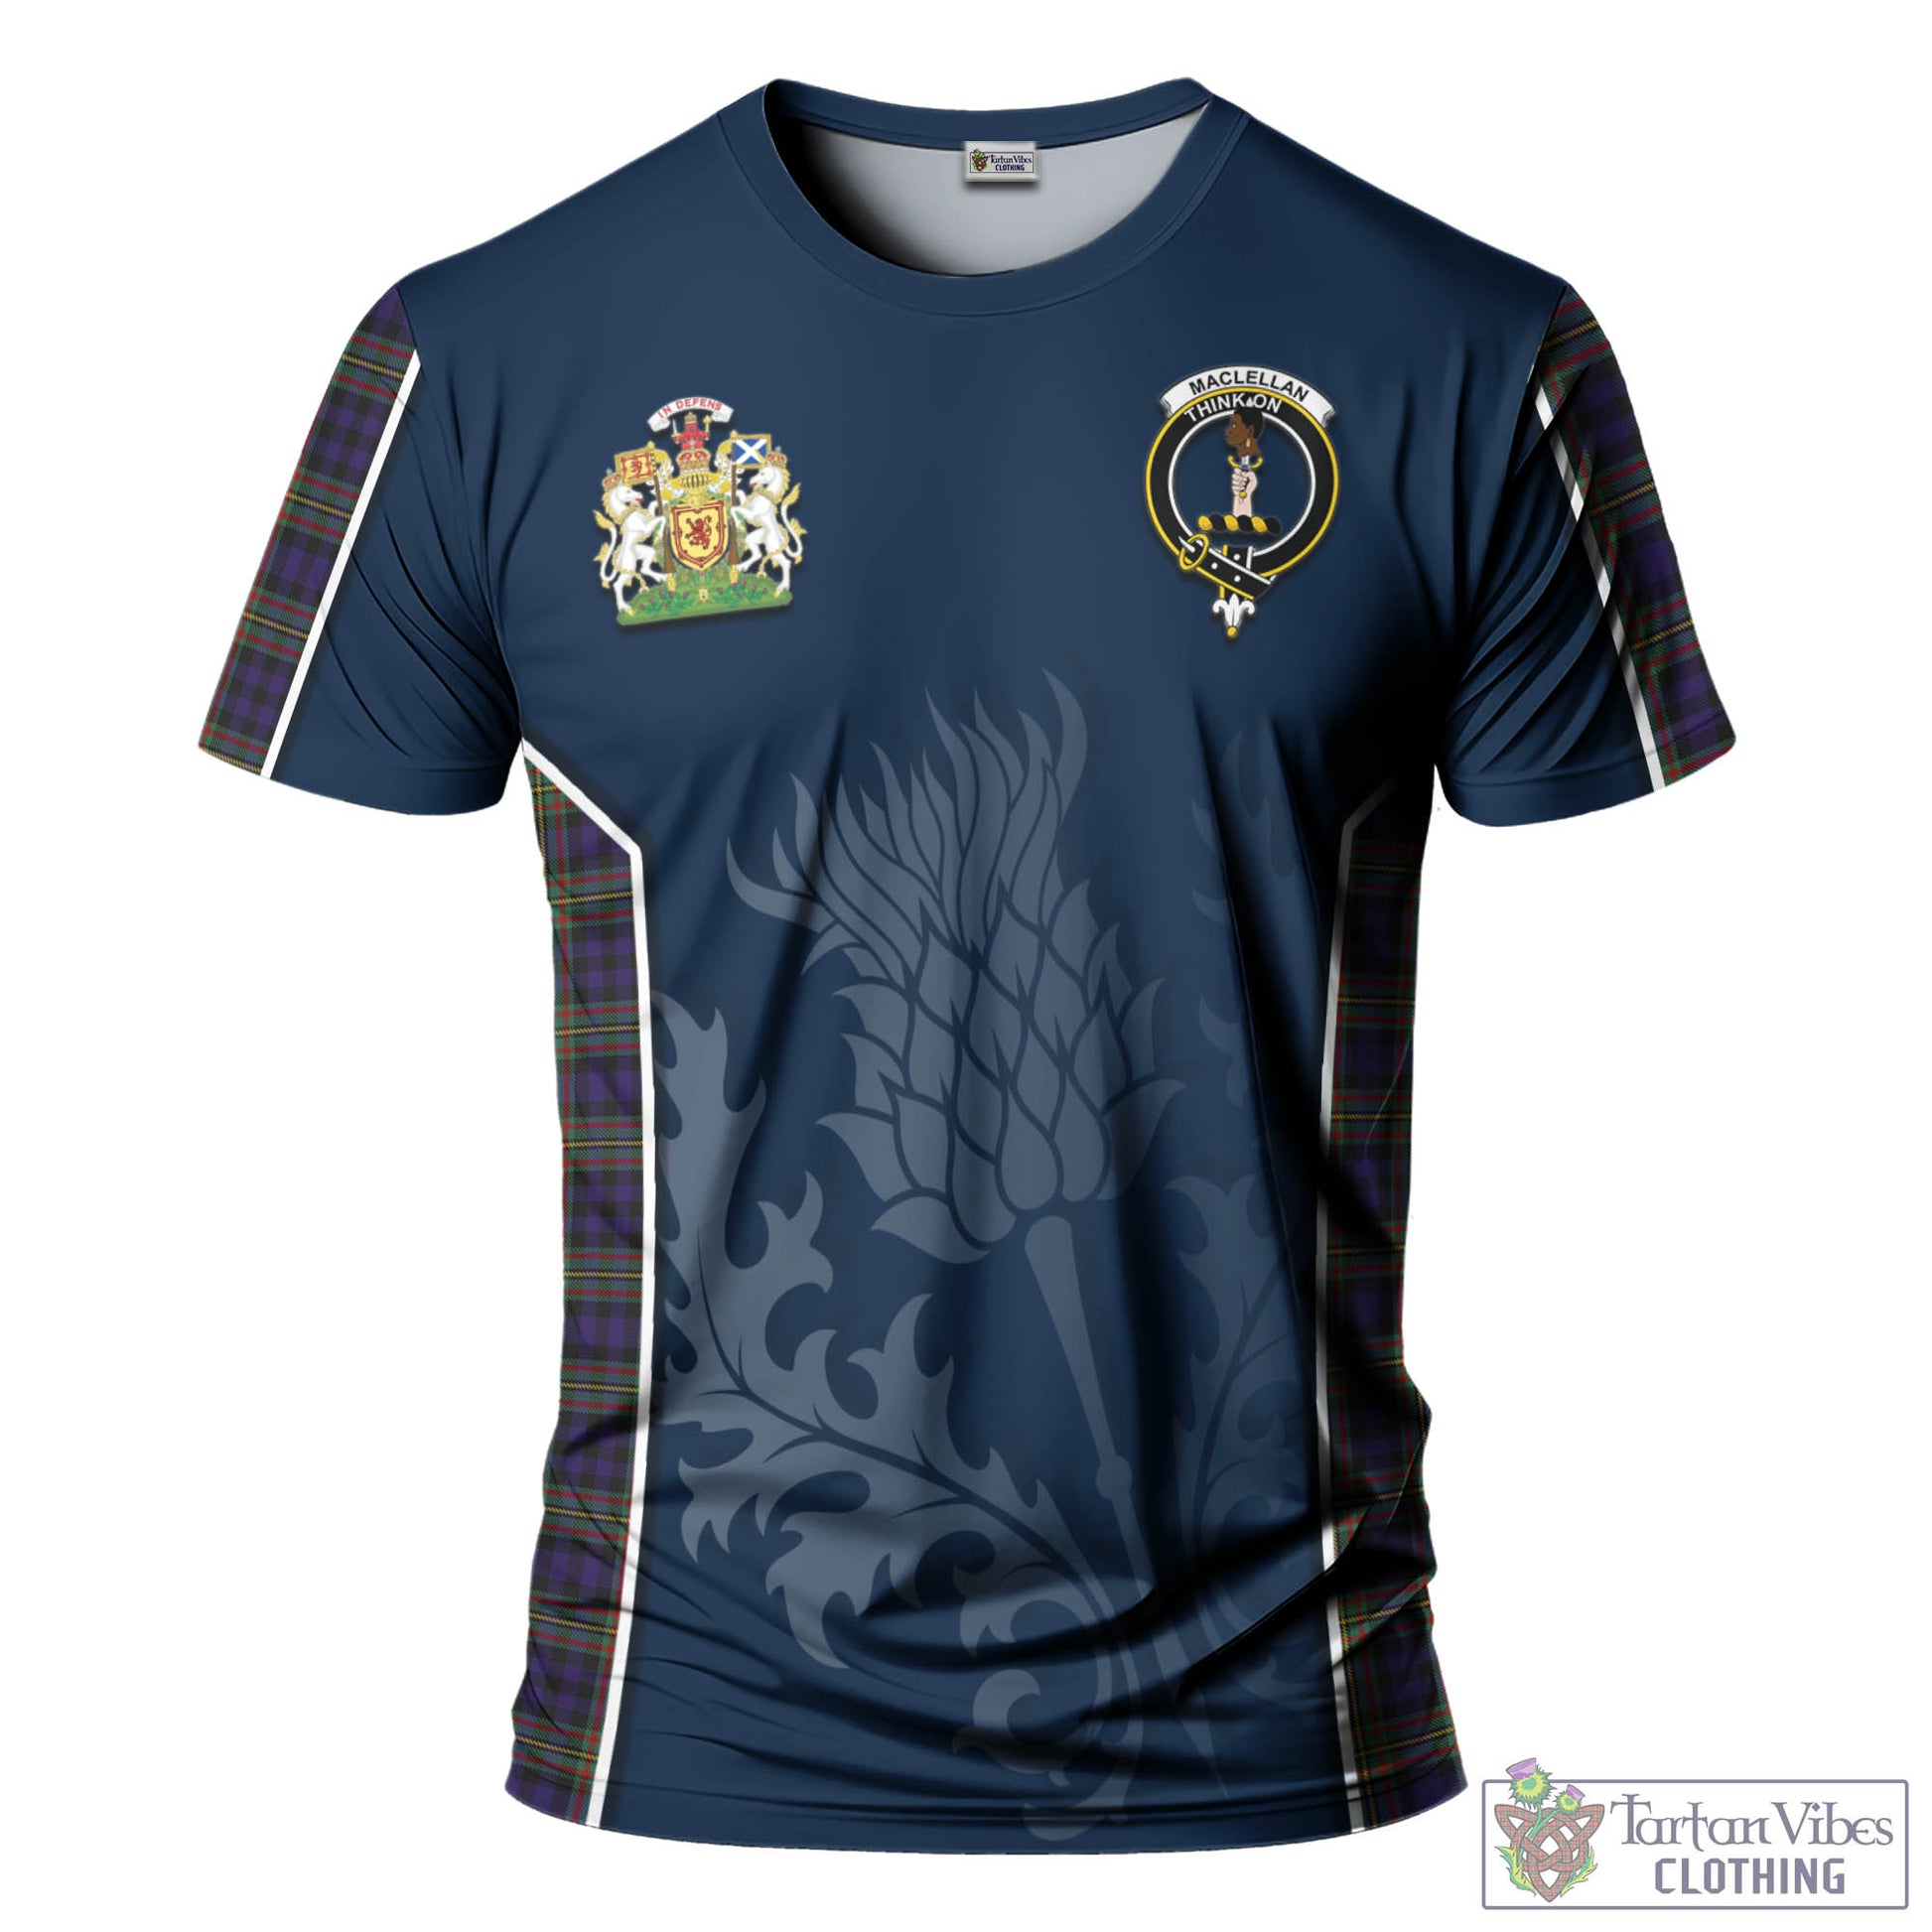 Tartan Vibes Clothing MacLellan Tartan T-Shirt with Family Crest and Scottish Thistle Vibes Sport Style